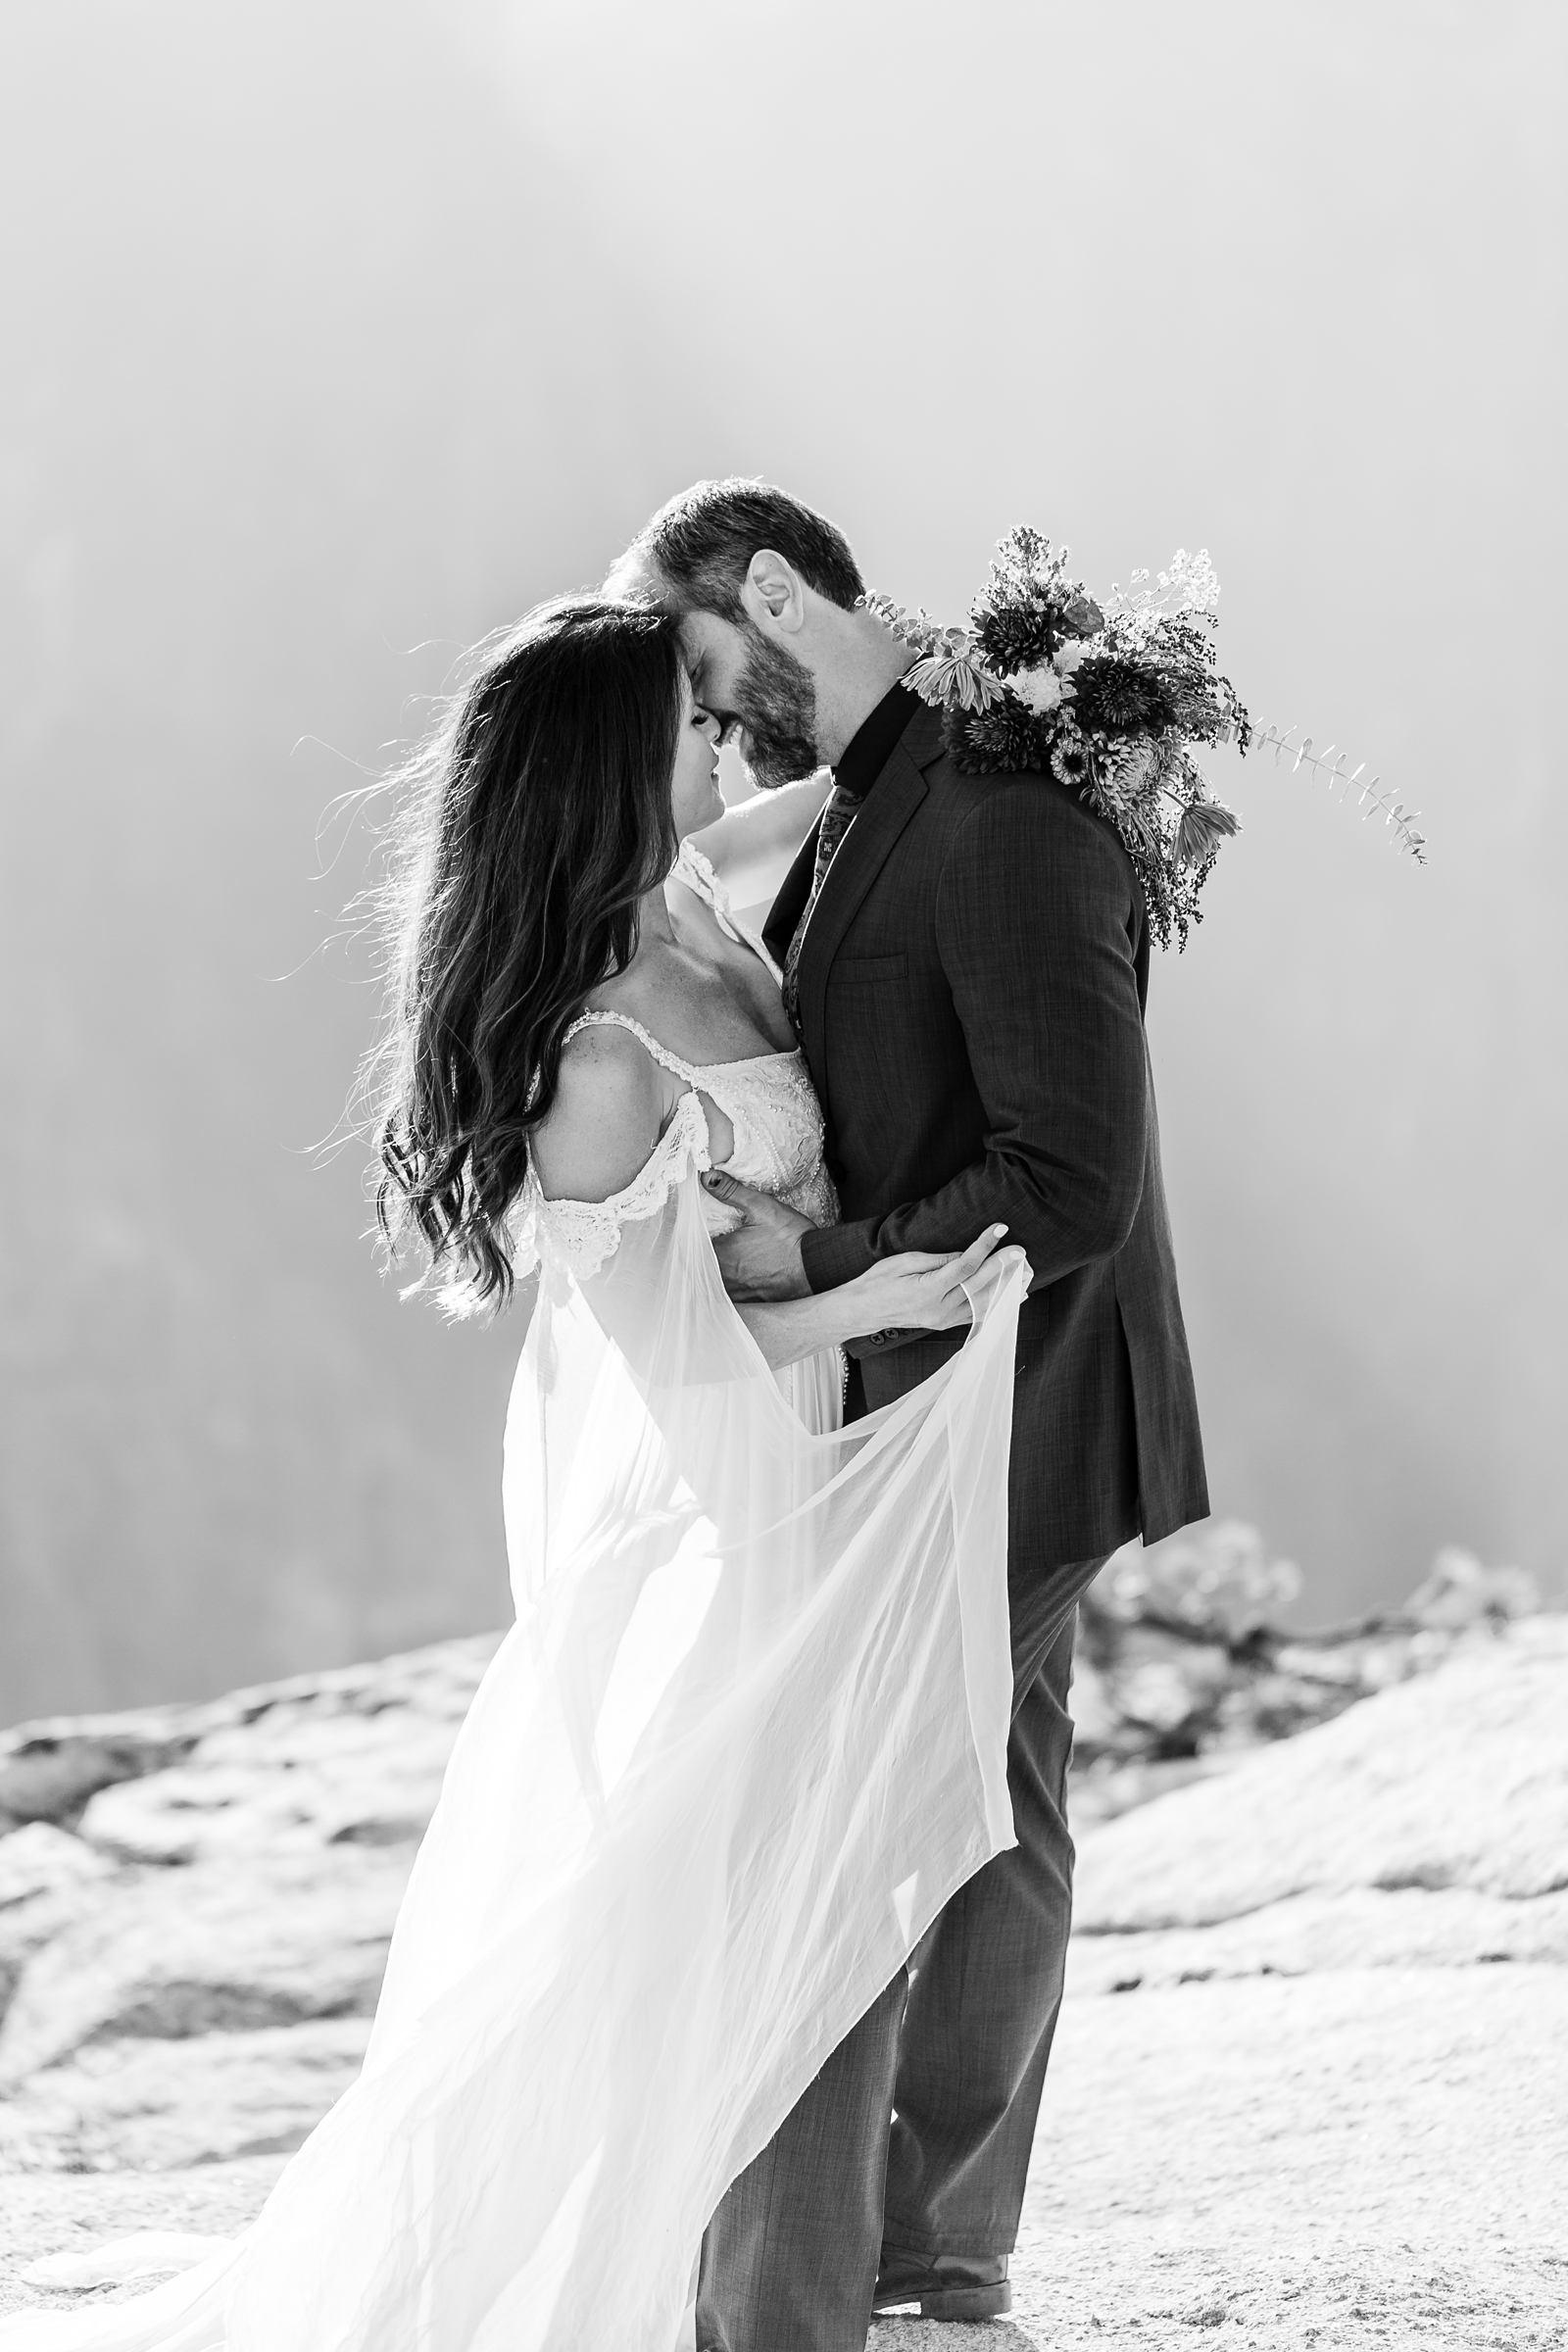 Romantic kiss in black and white.